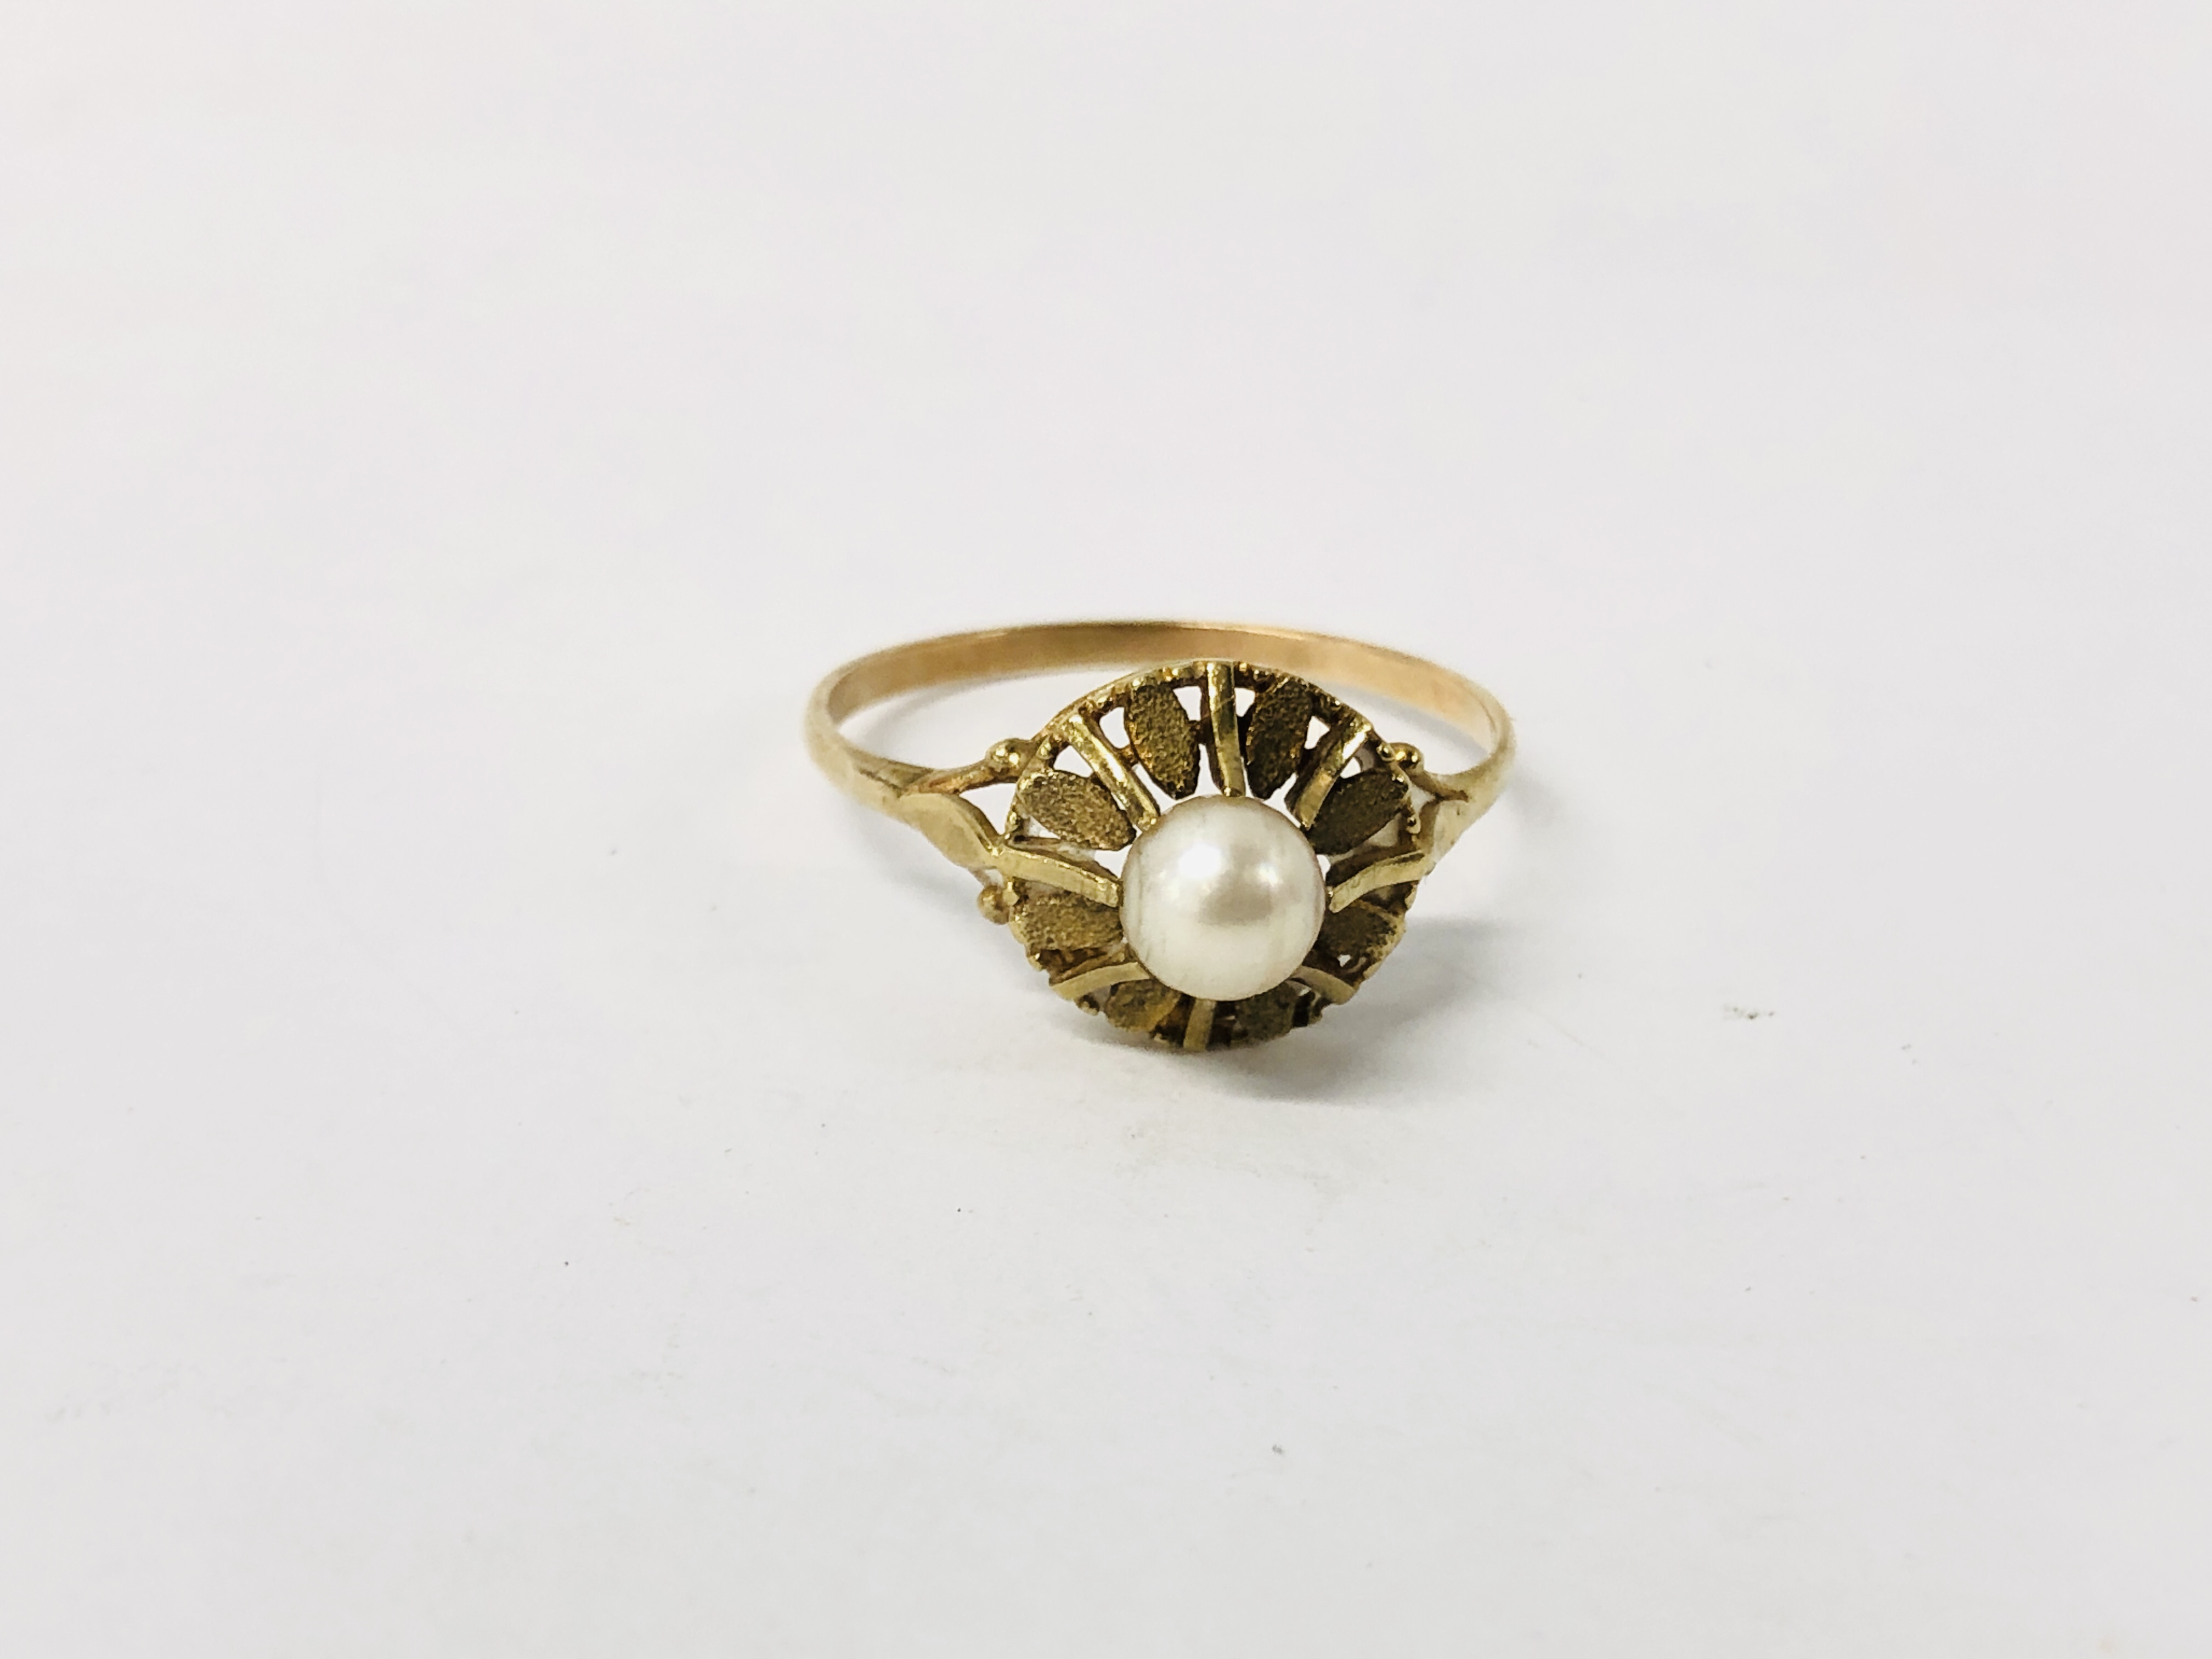 A PEARL RING, A SINGLE CLAW SET STONE, ON AN UNMARKED YELLOW METAL BAND. - Image 6 of 8